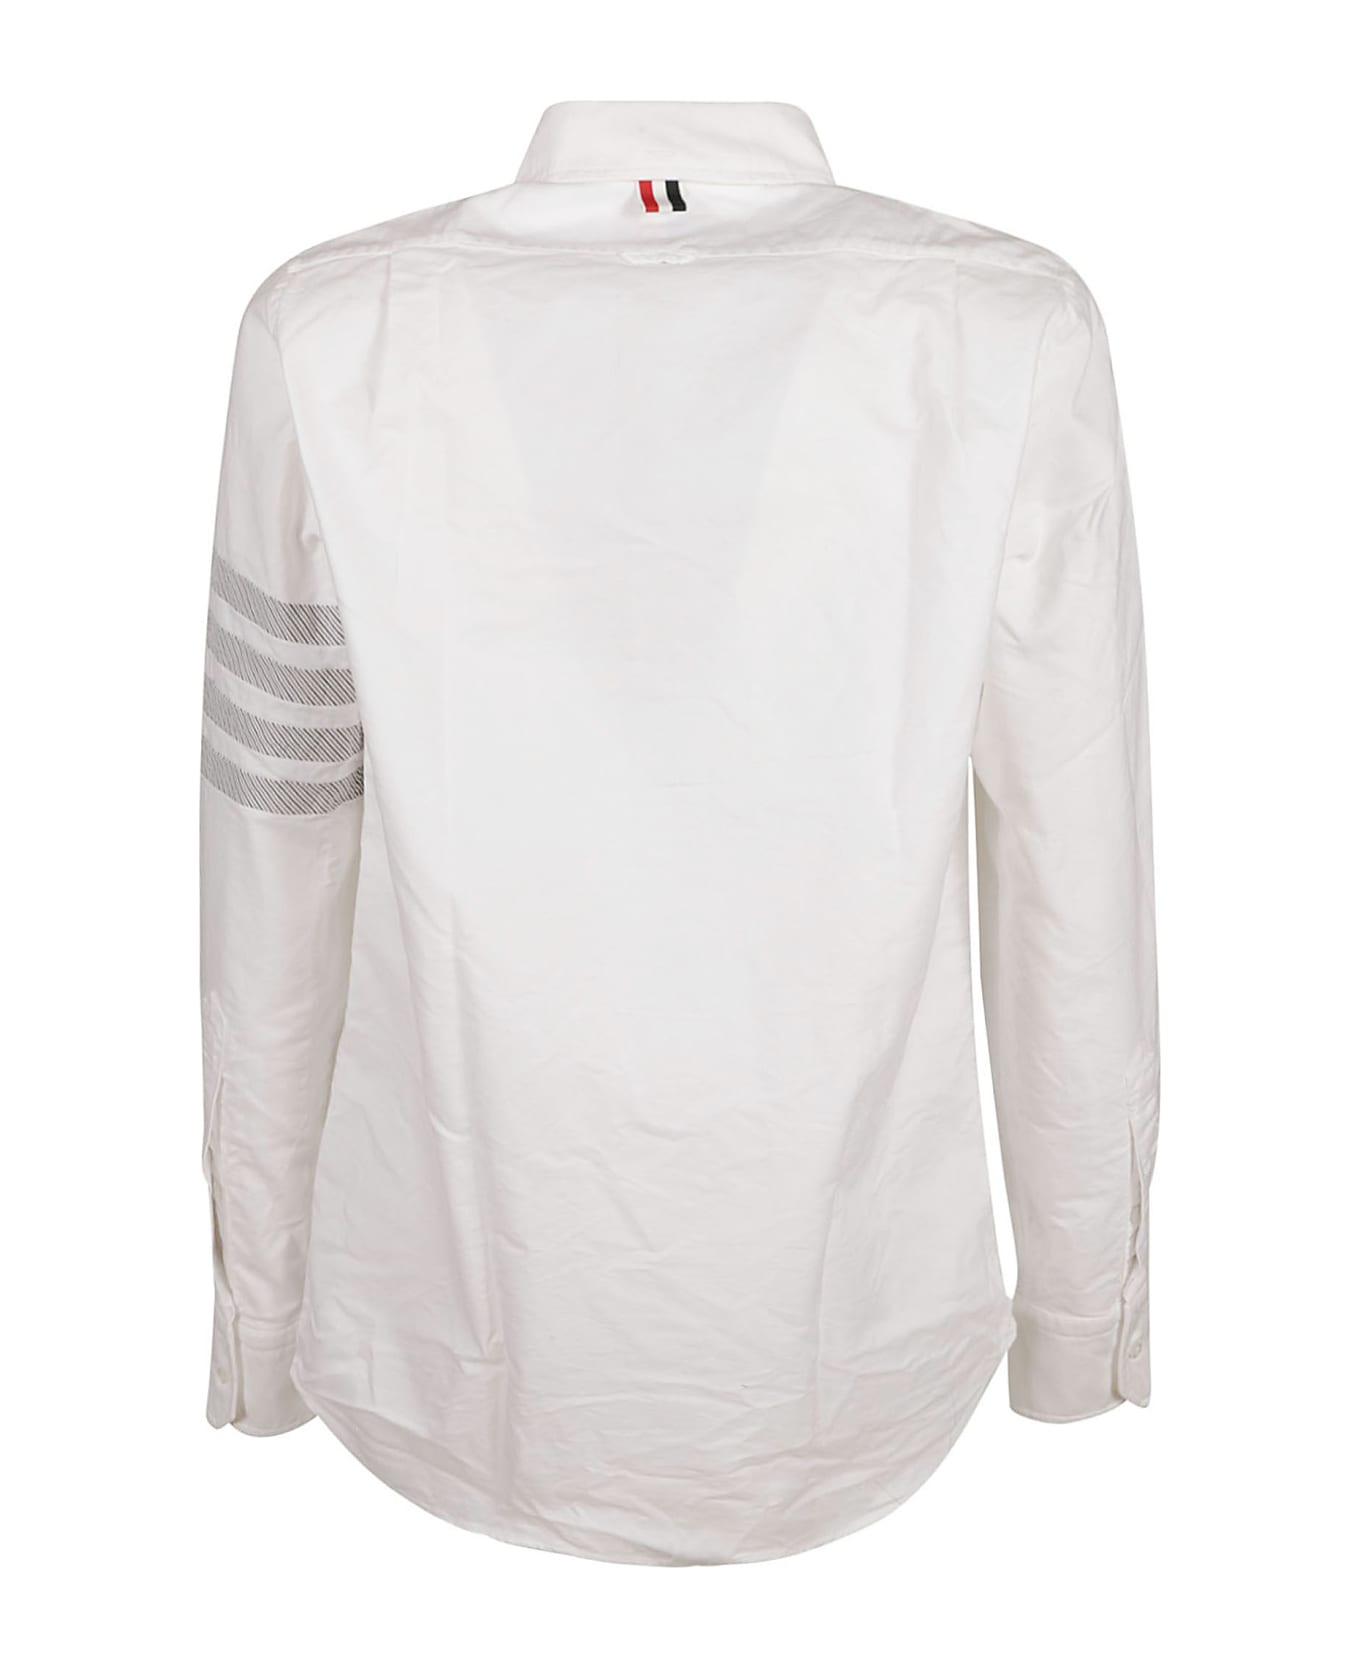 Thom Browne Straight Fit Button Down Shirt - White